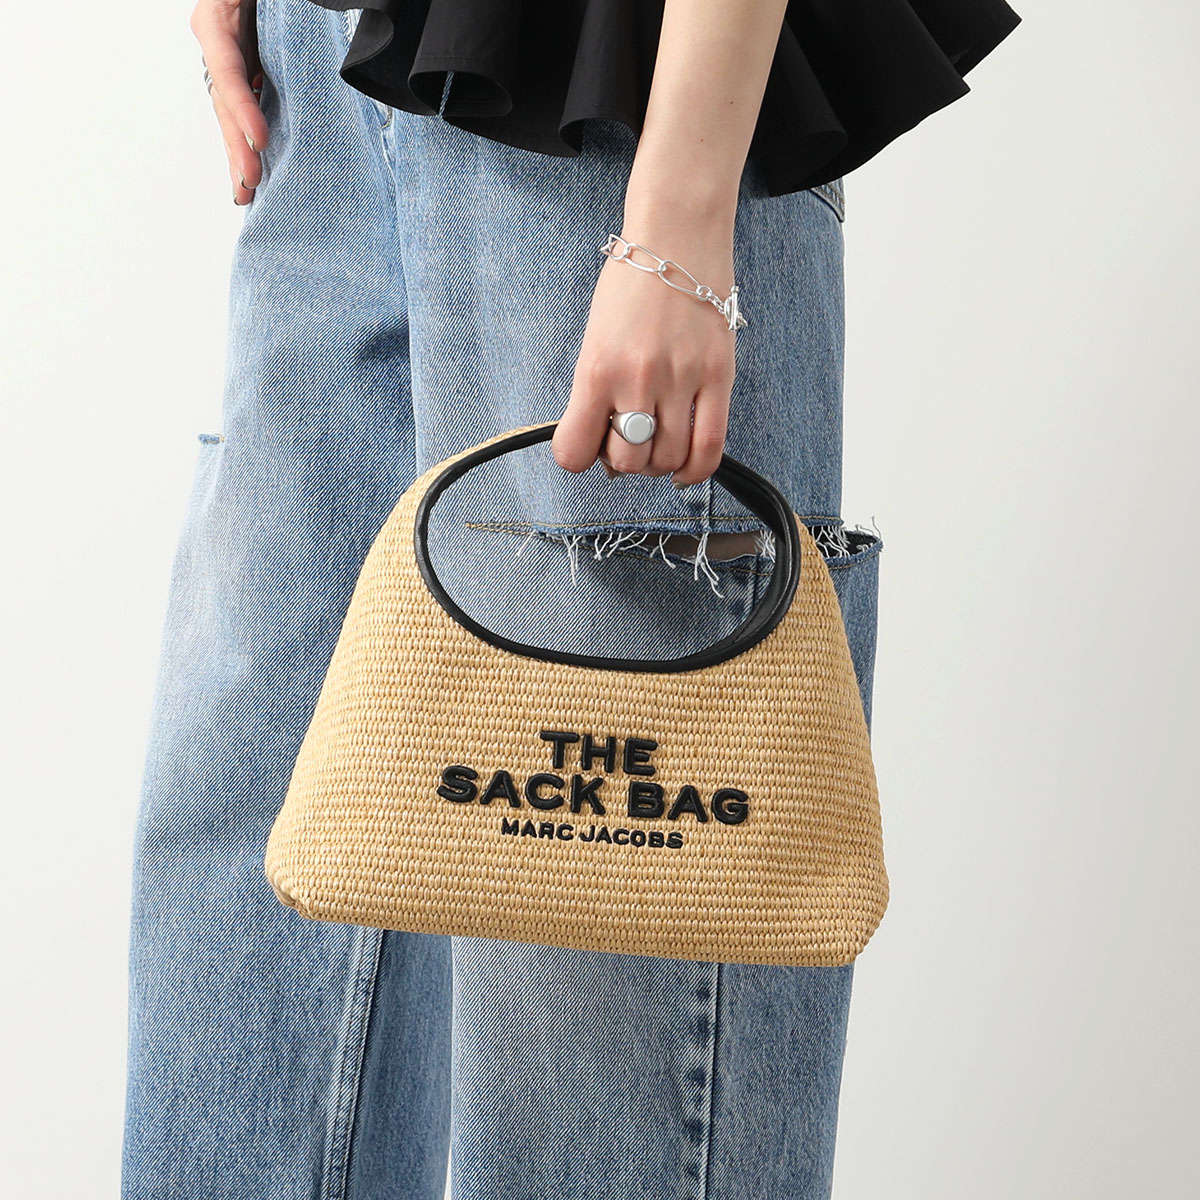 MARC JACOBS マークジェイコブス かごバッグ THE WOVEN MINI SACK BAG 2S4HSH054H03 レディース ハンドバッグ カゴバッグ ロゴ 刺繍 鞄 255/NATURAL｜s-musee｜02